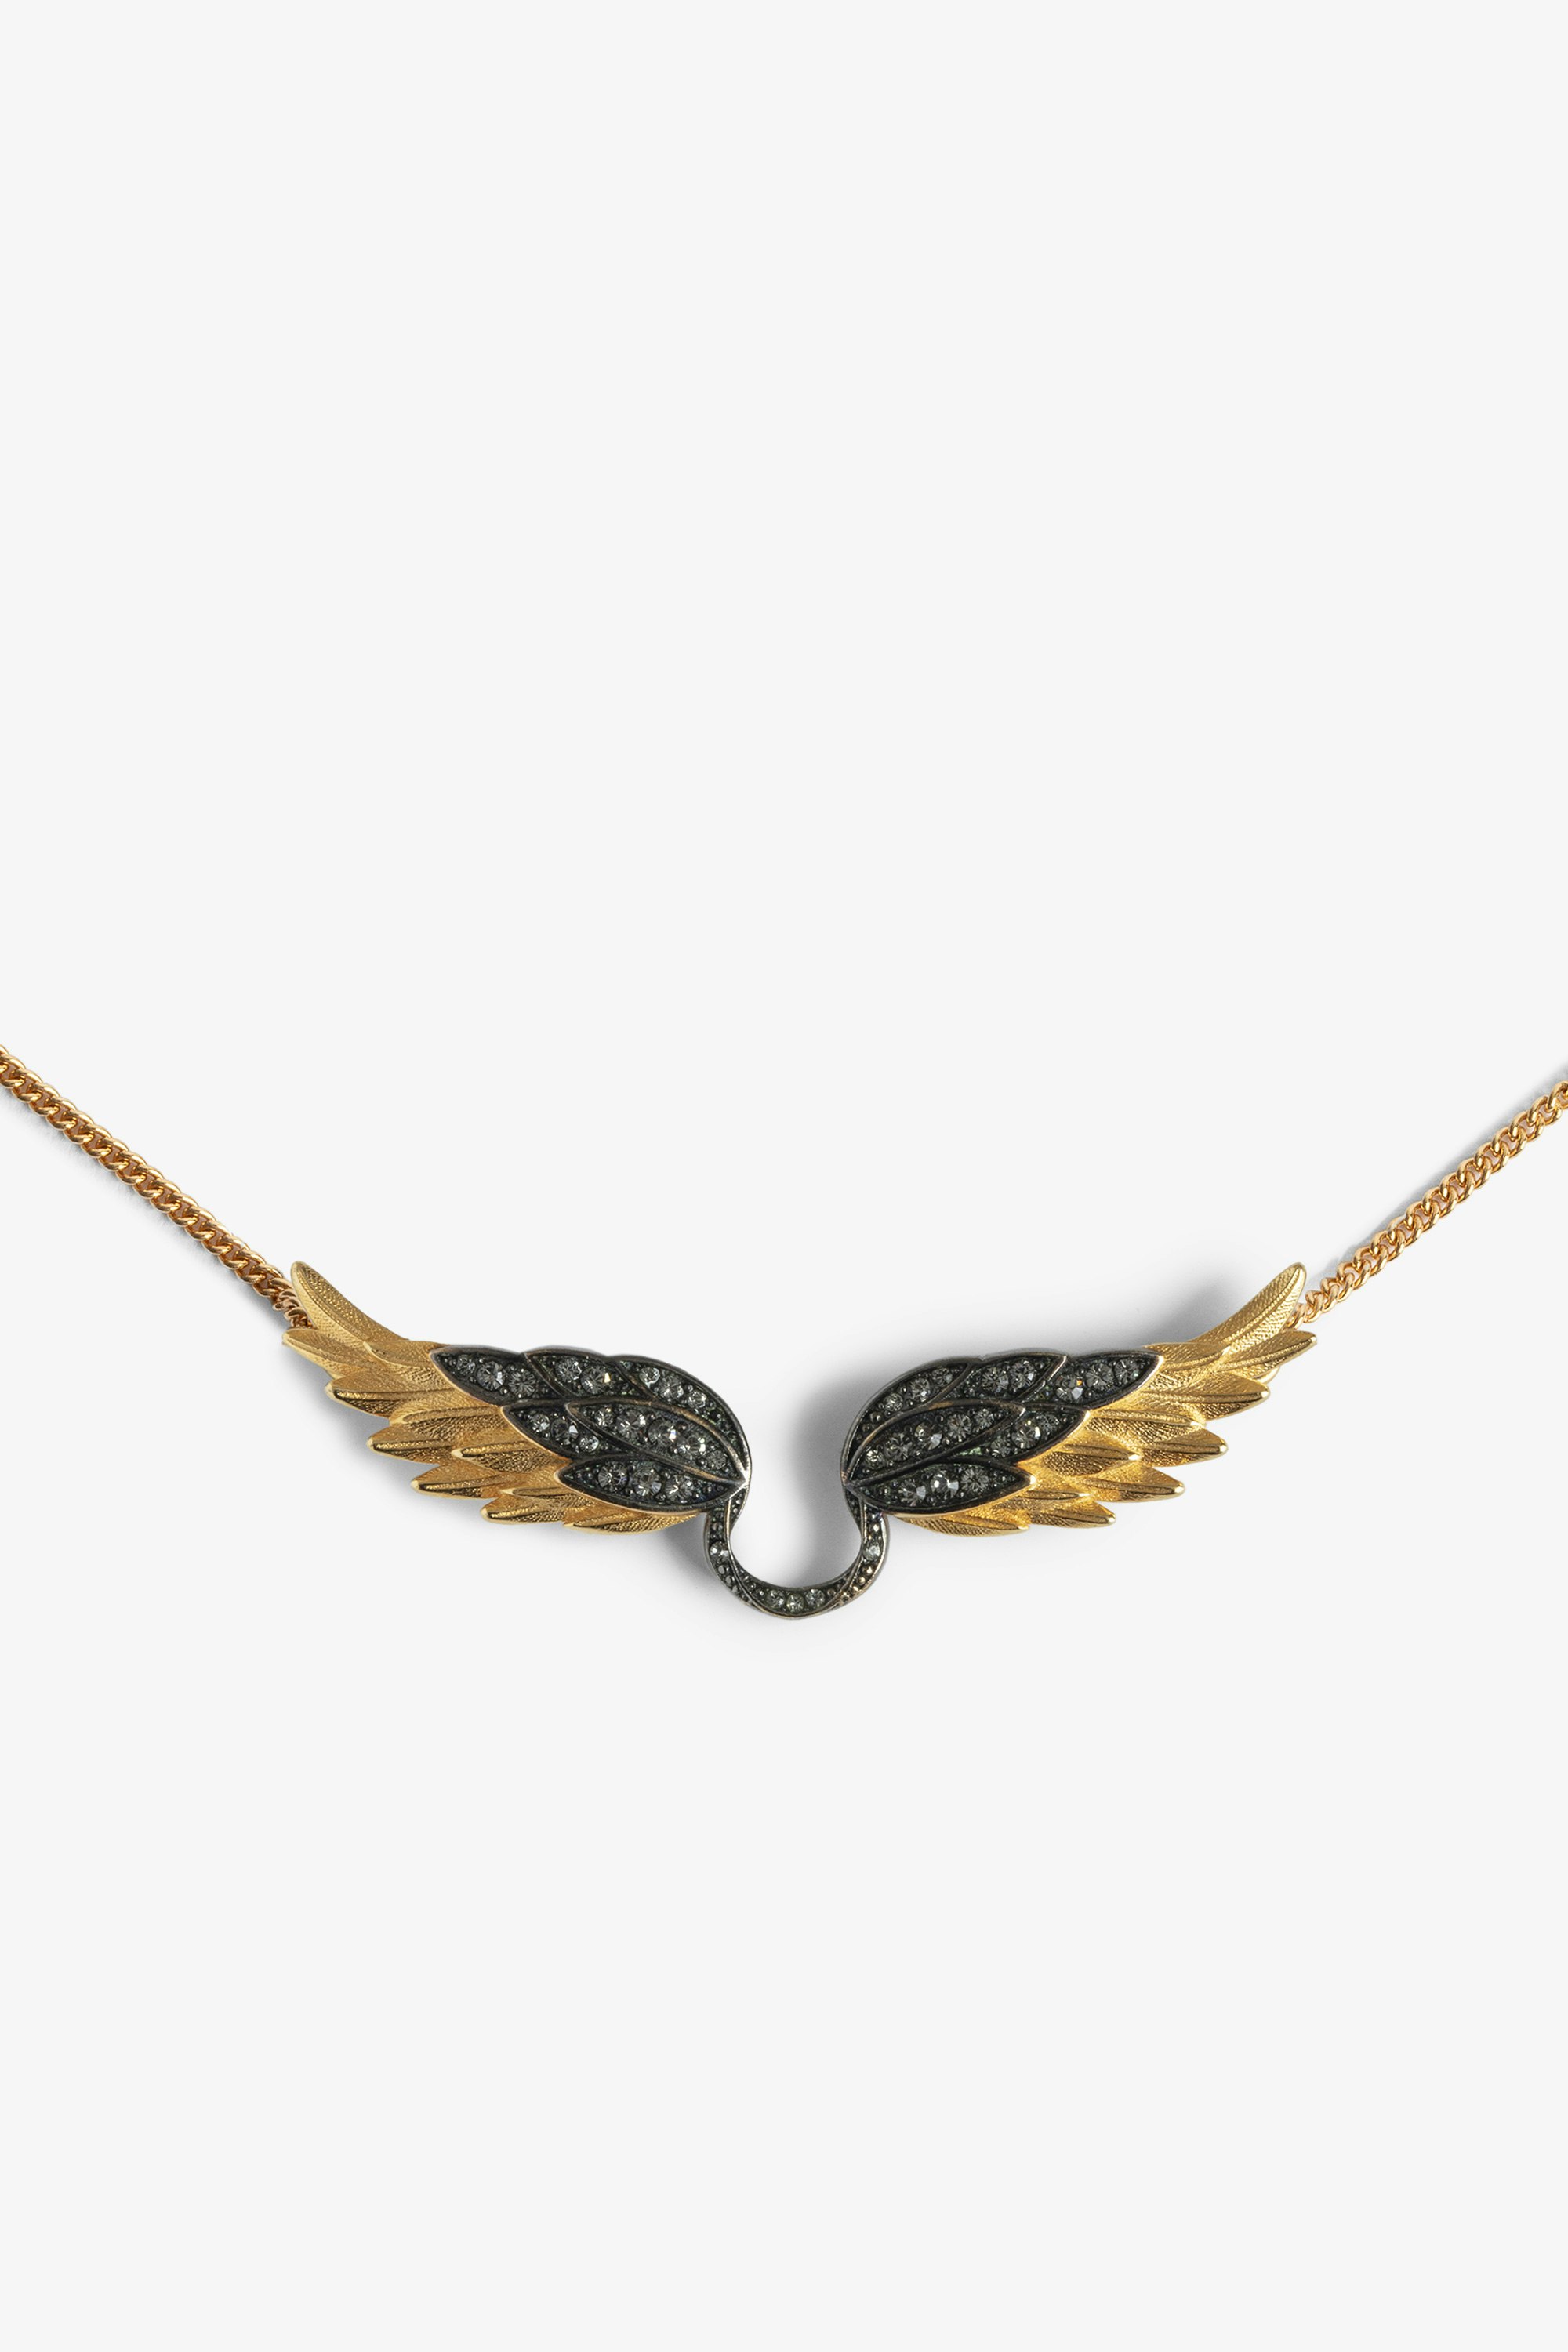 Rock Feather Necklace - Chain necklace with crystal-embellished wings pendant.